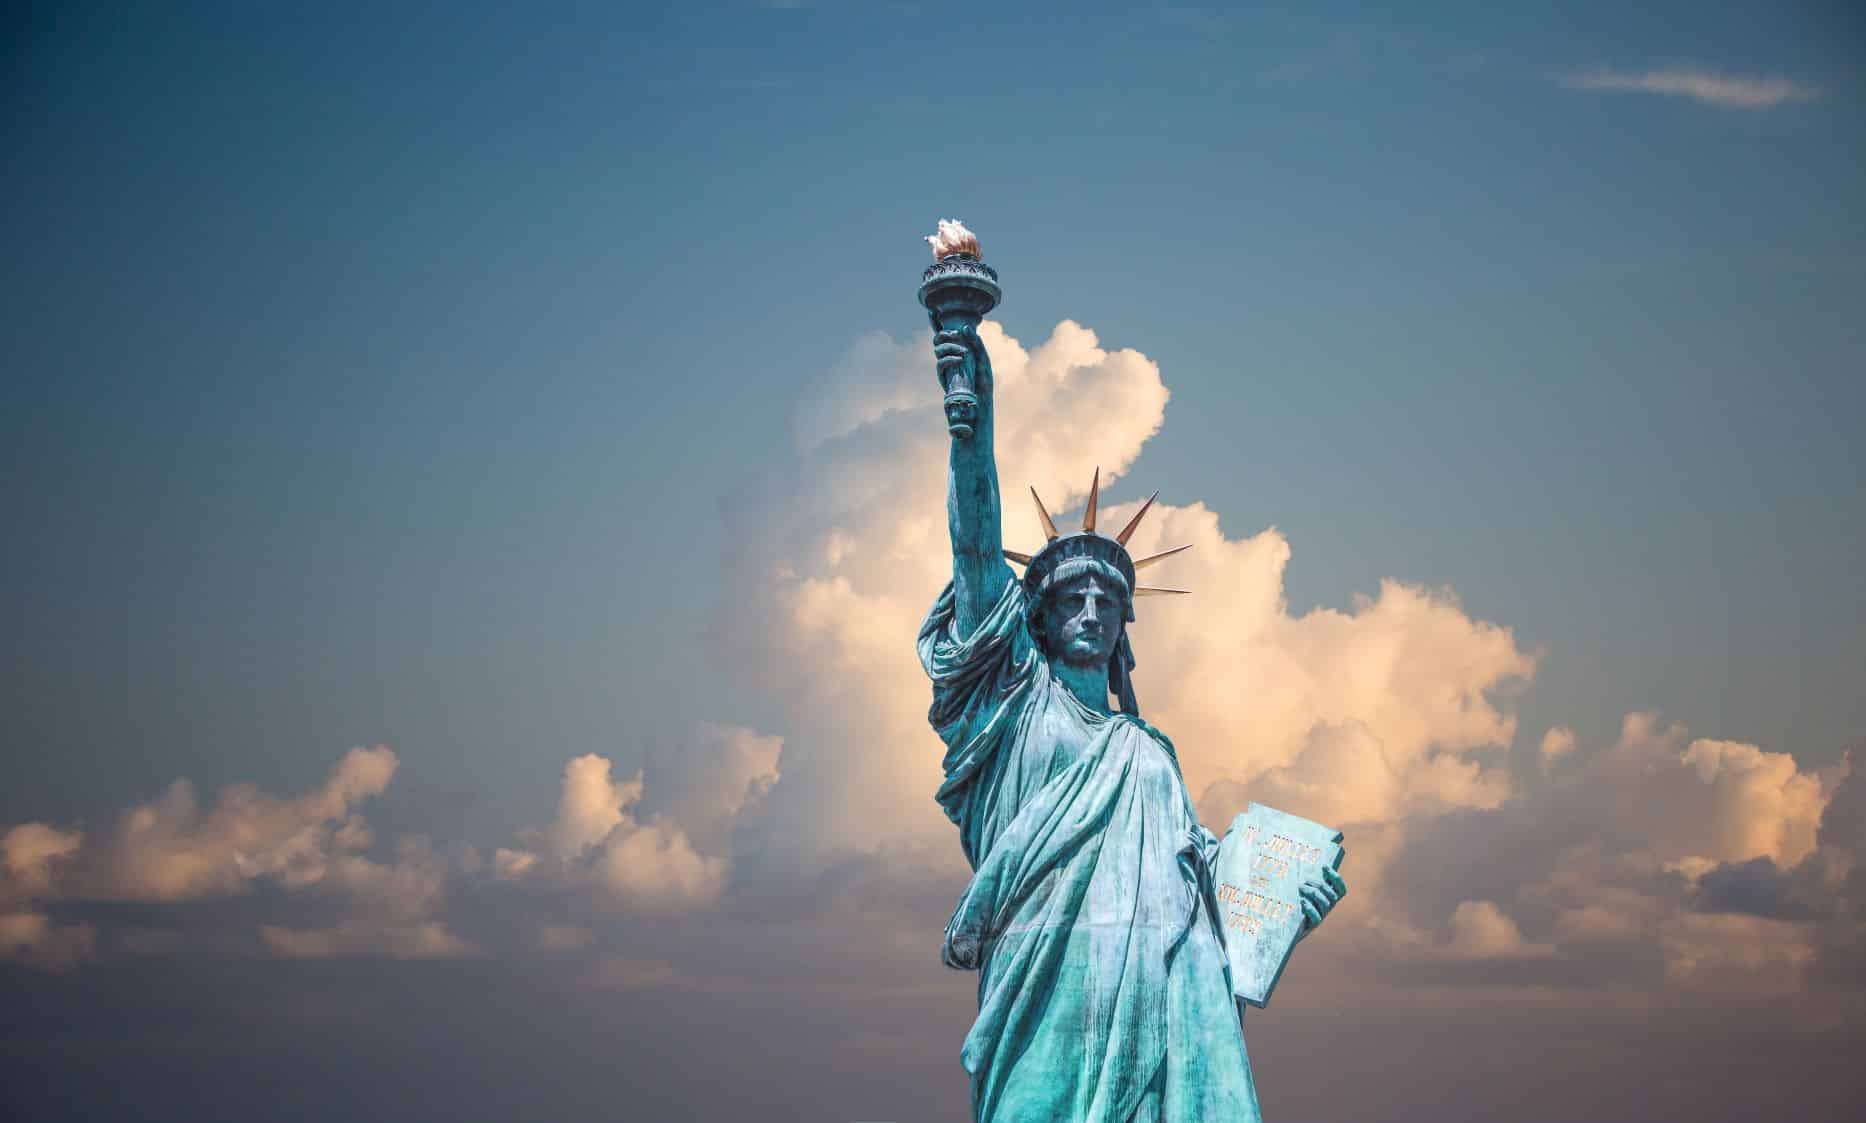 statue of liberty against cloudy sky background